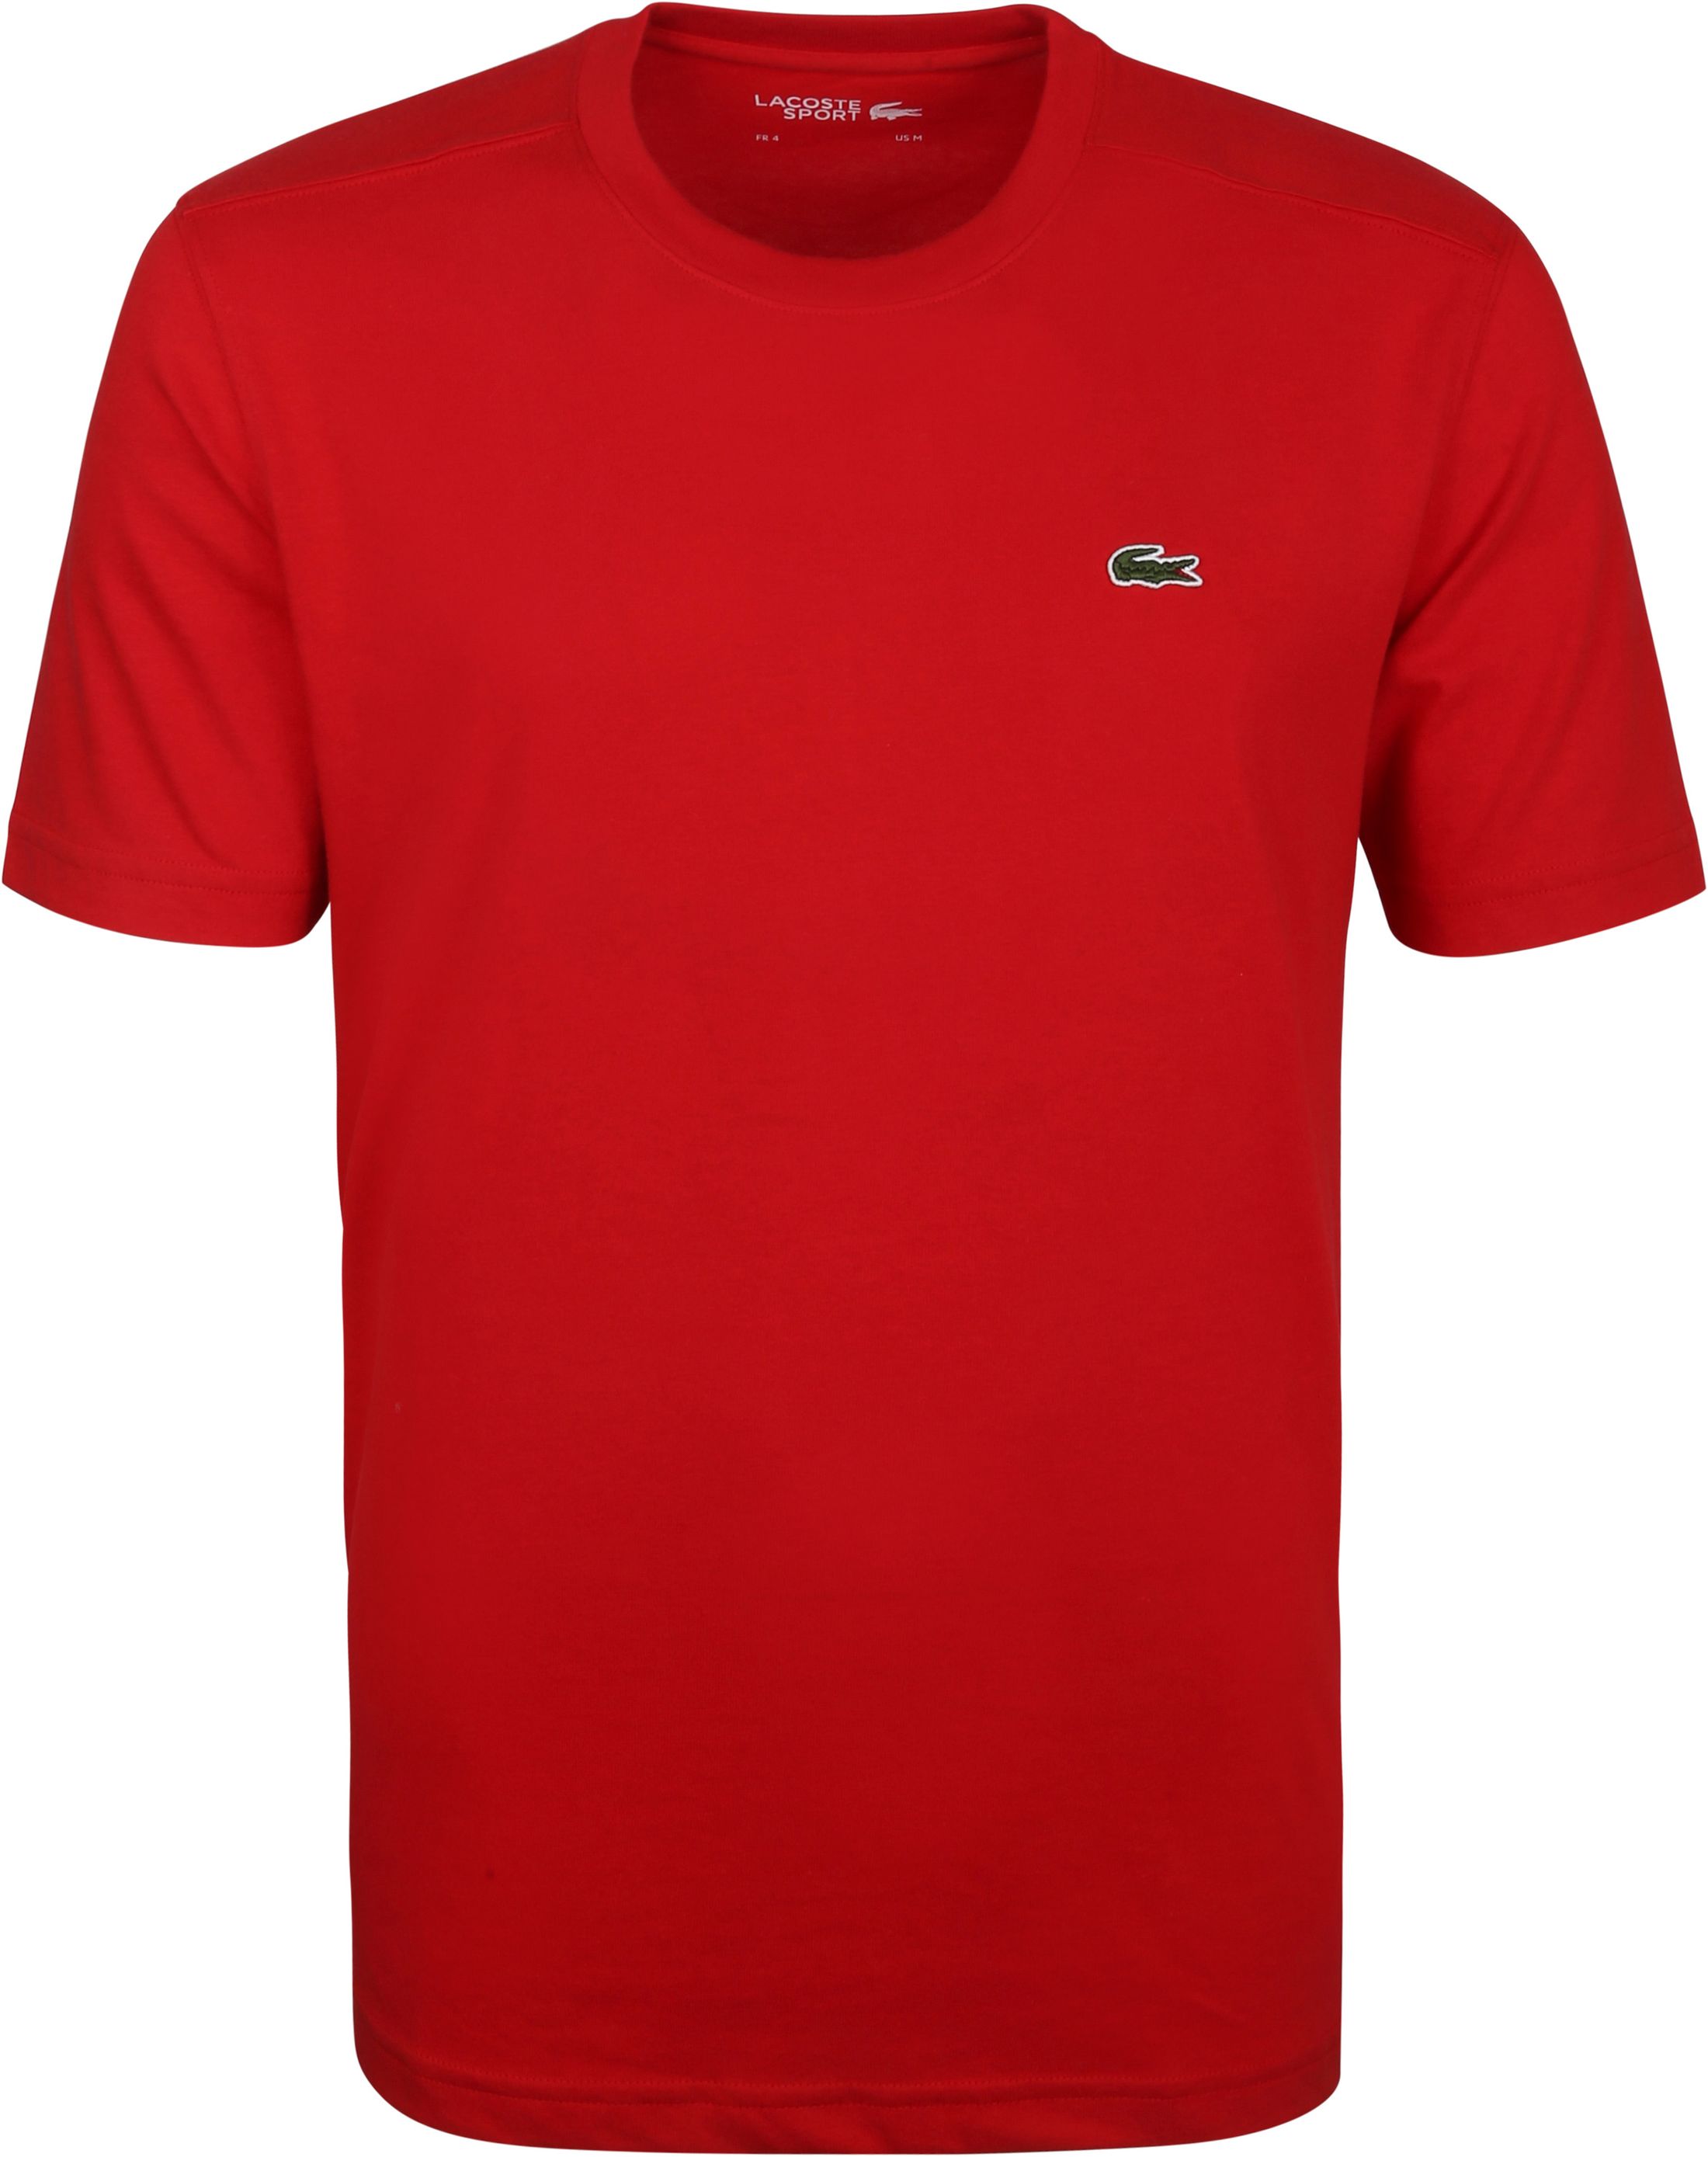 Lacoste T-Shirt Red size L